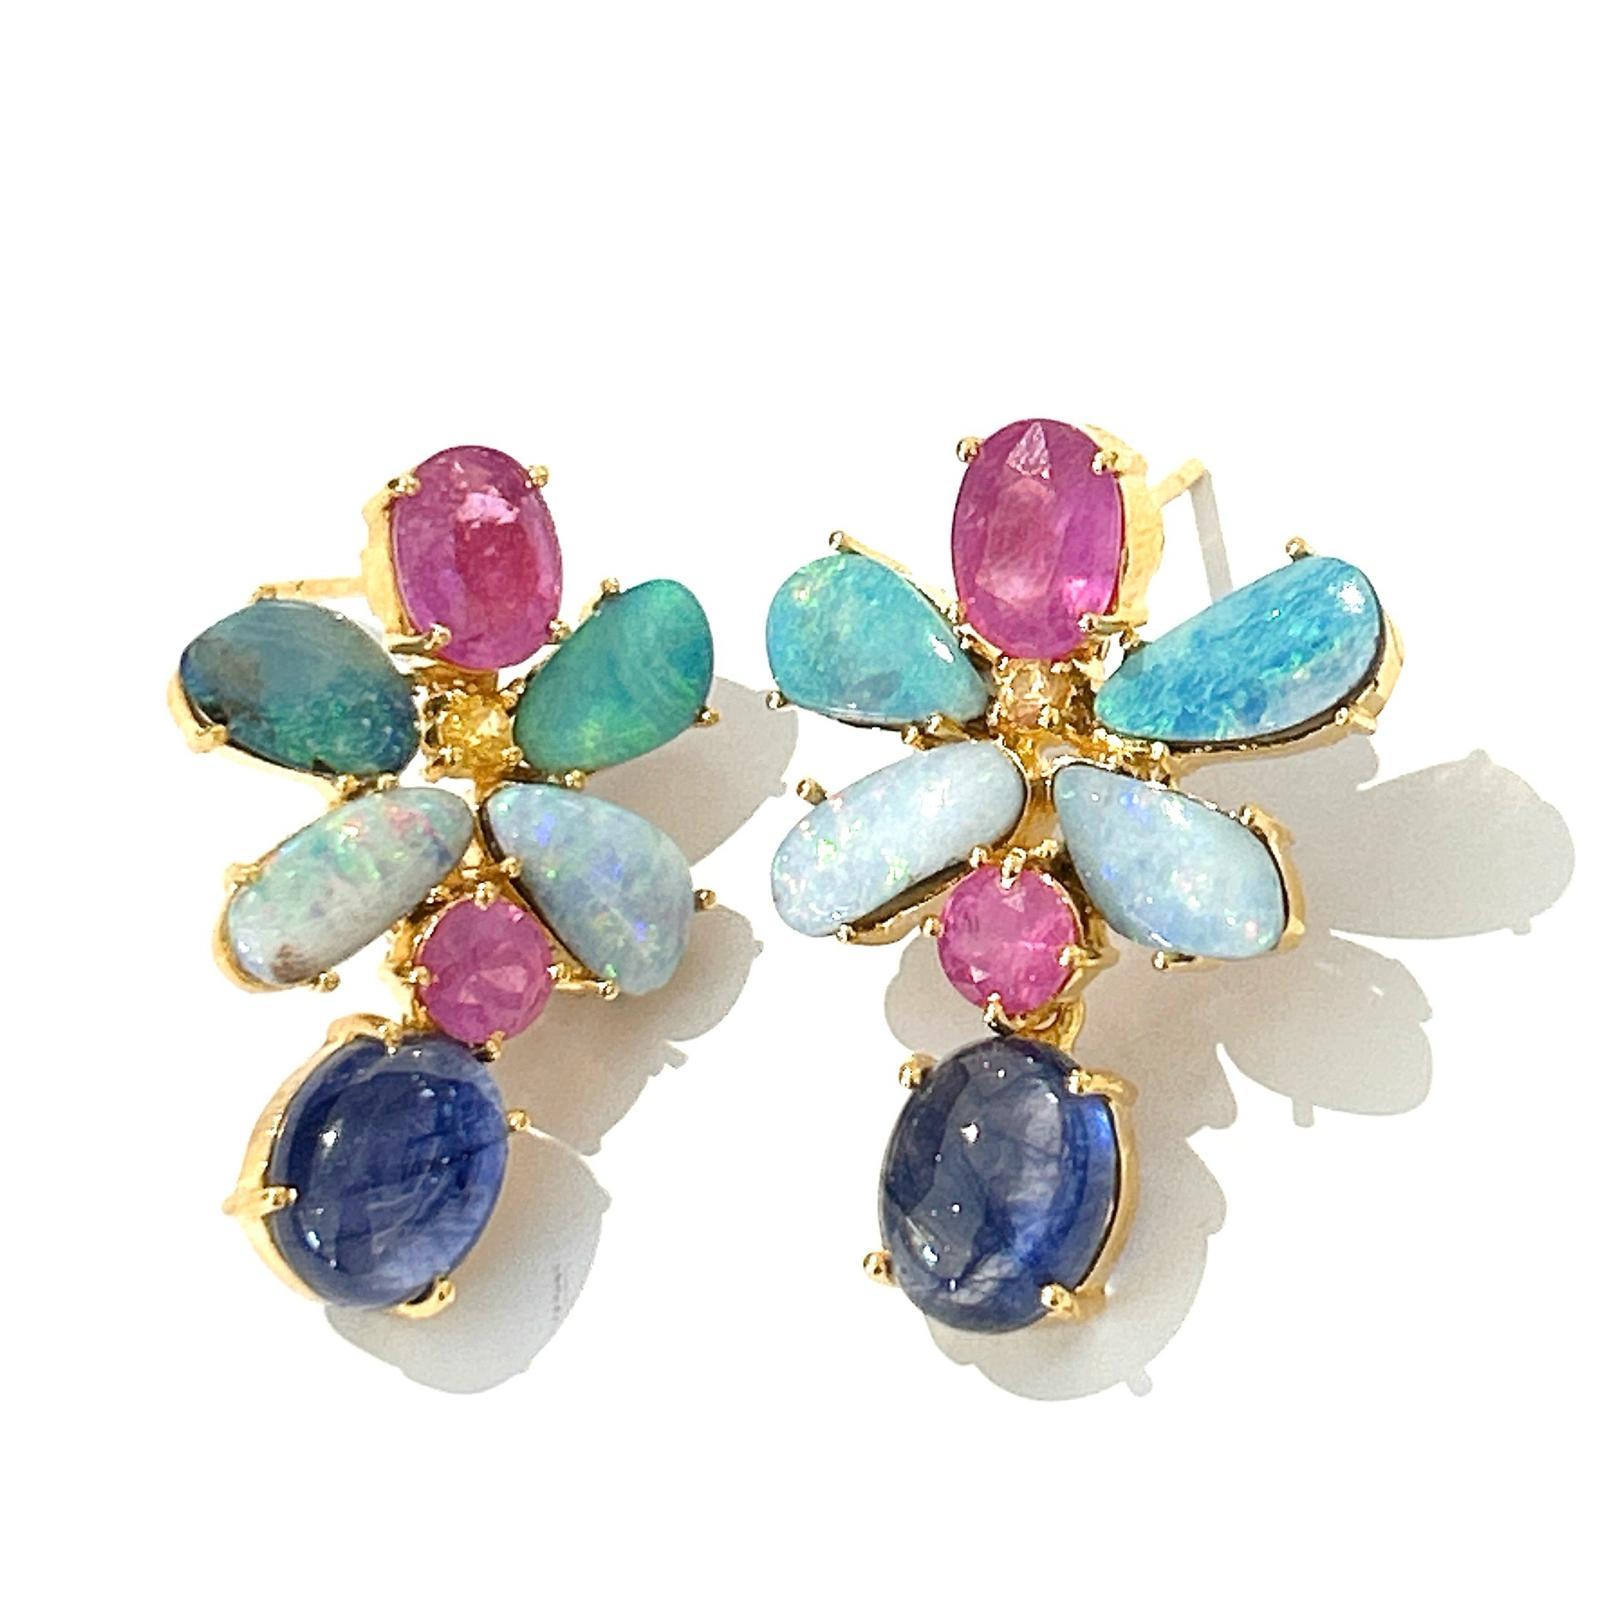 Bochic “Orient” Opal, Ruby & Multi Sapphire  Earrings Set 18K Gold&Silver 

Natural Rubies - 4 carat  
Natural Blue Opal- 2.50 carat 
Natural Blue Sapphires - 4 carat 

The earrings from the 